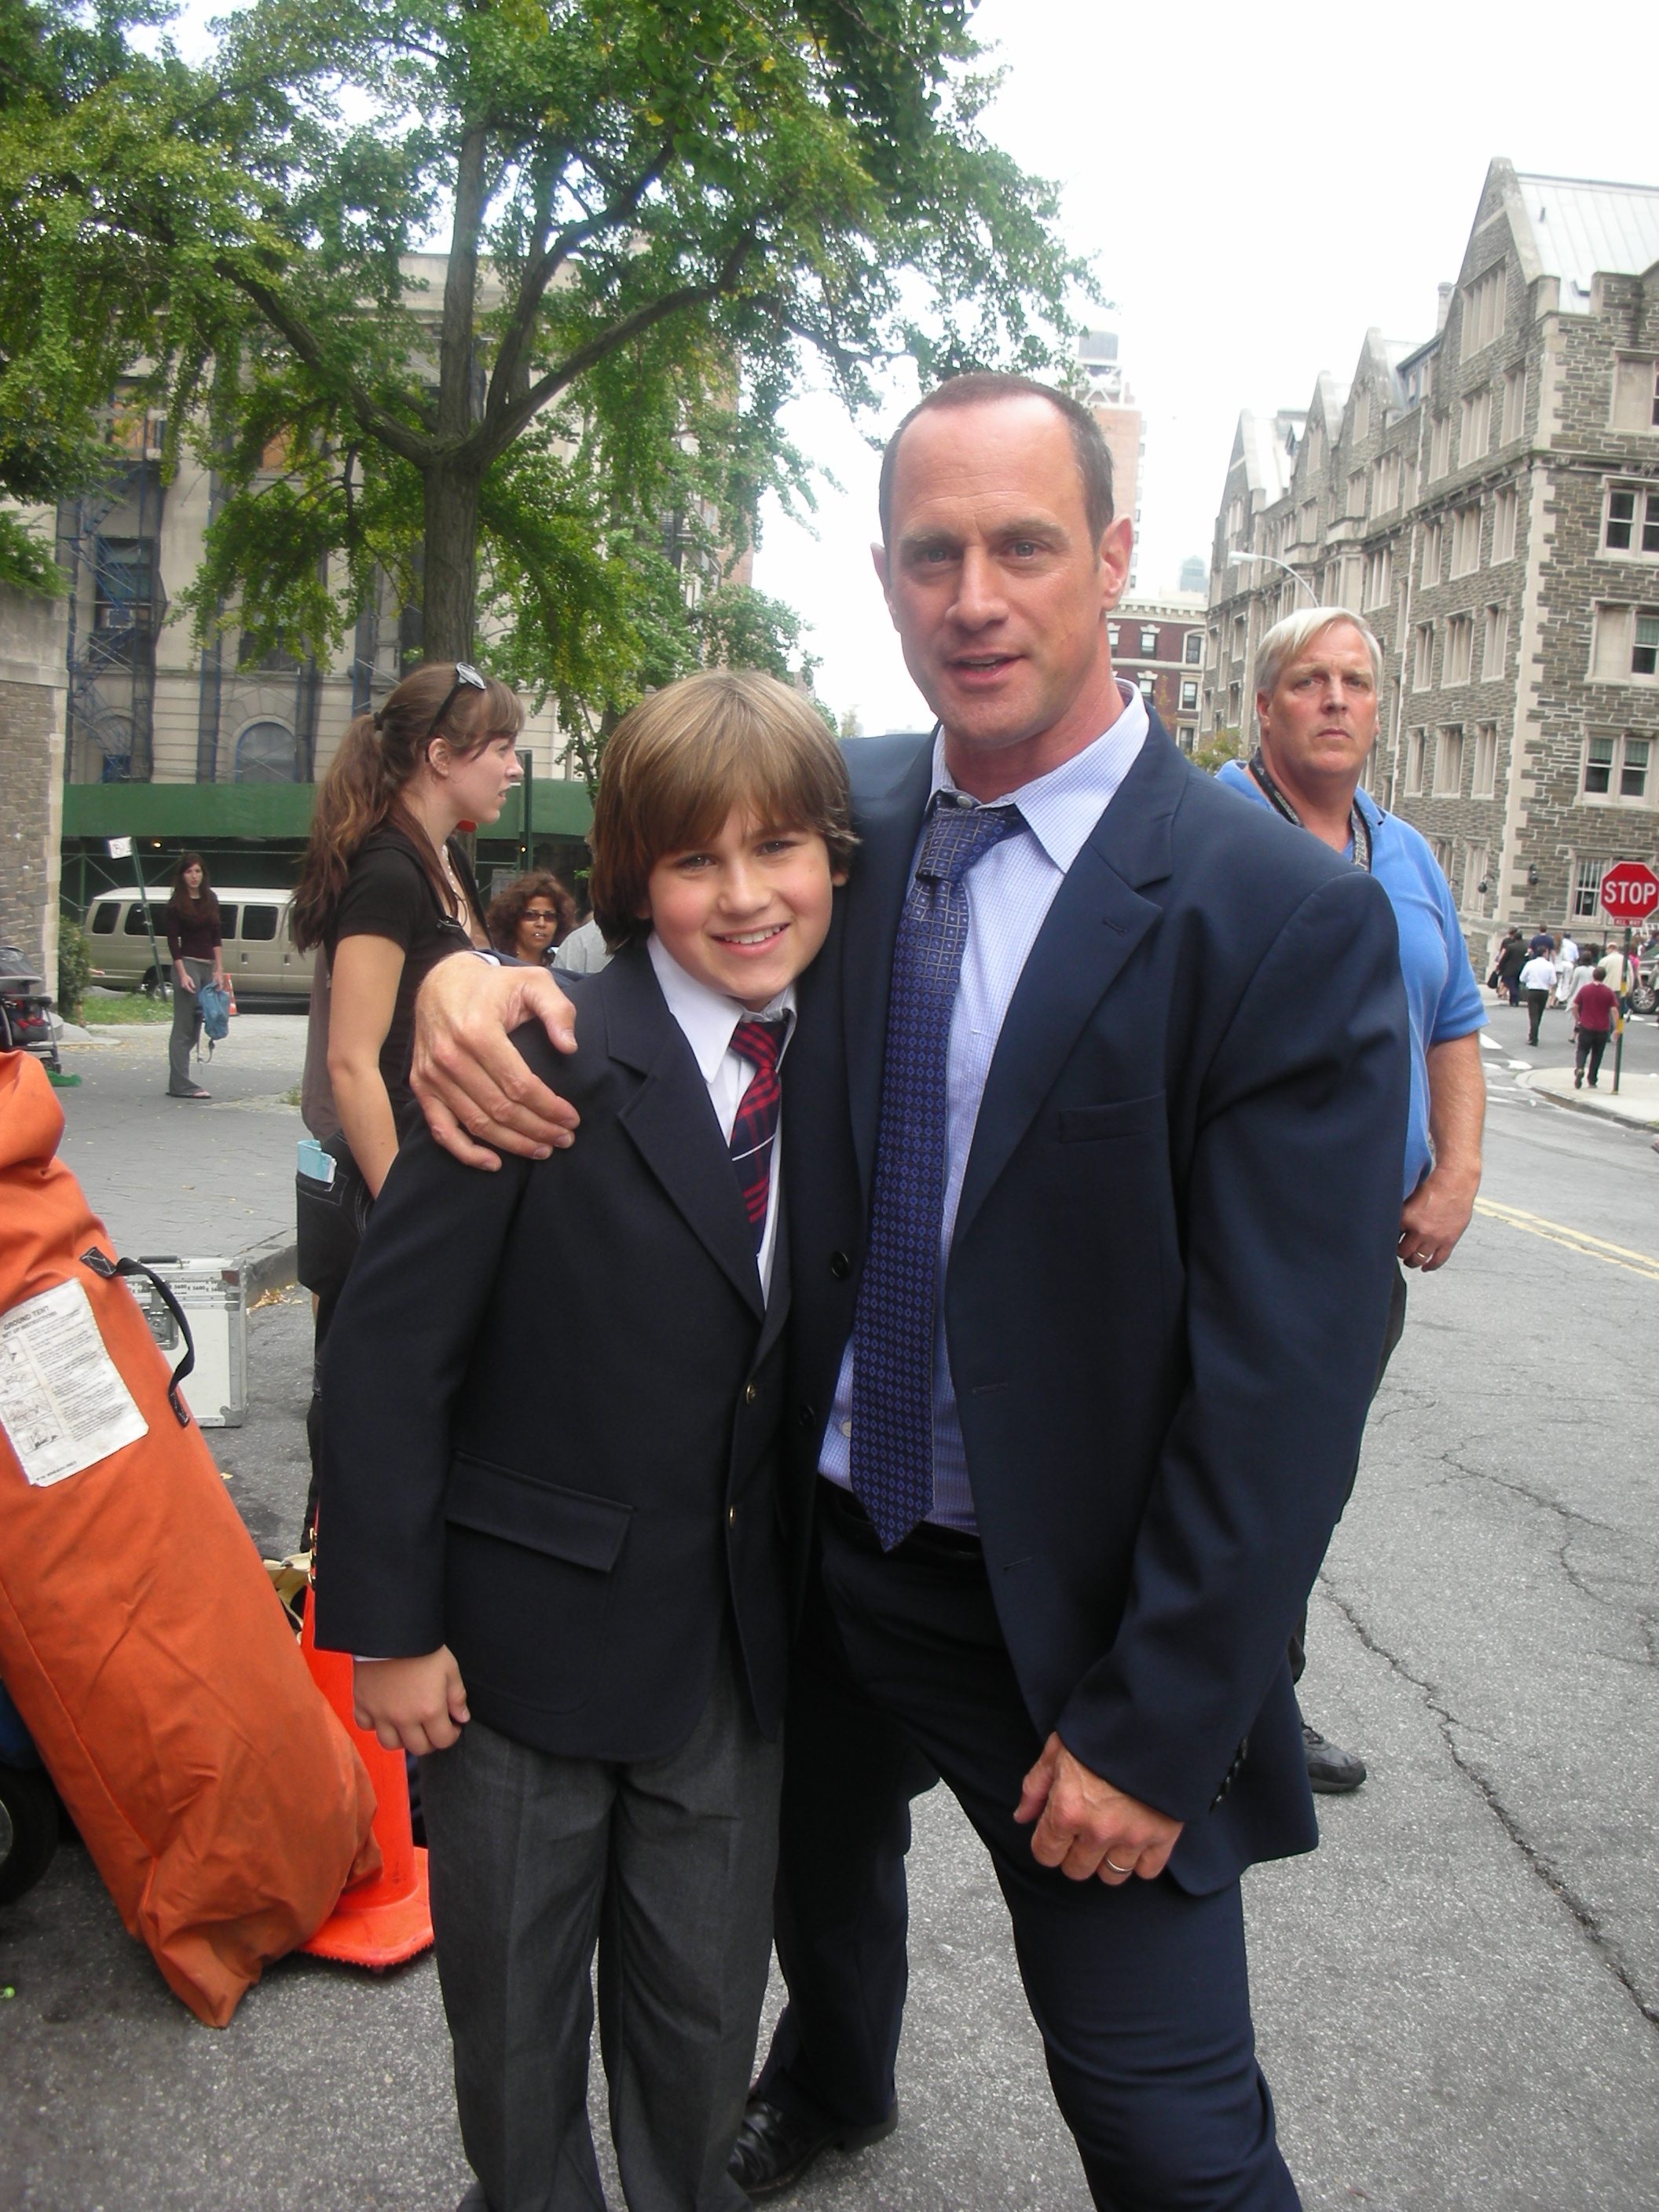 Law & Order SVU with Christopher Meloni